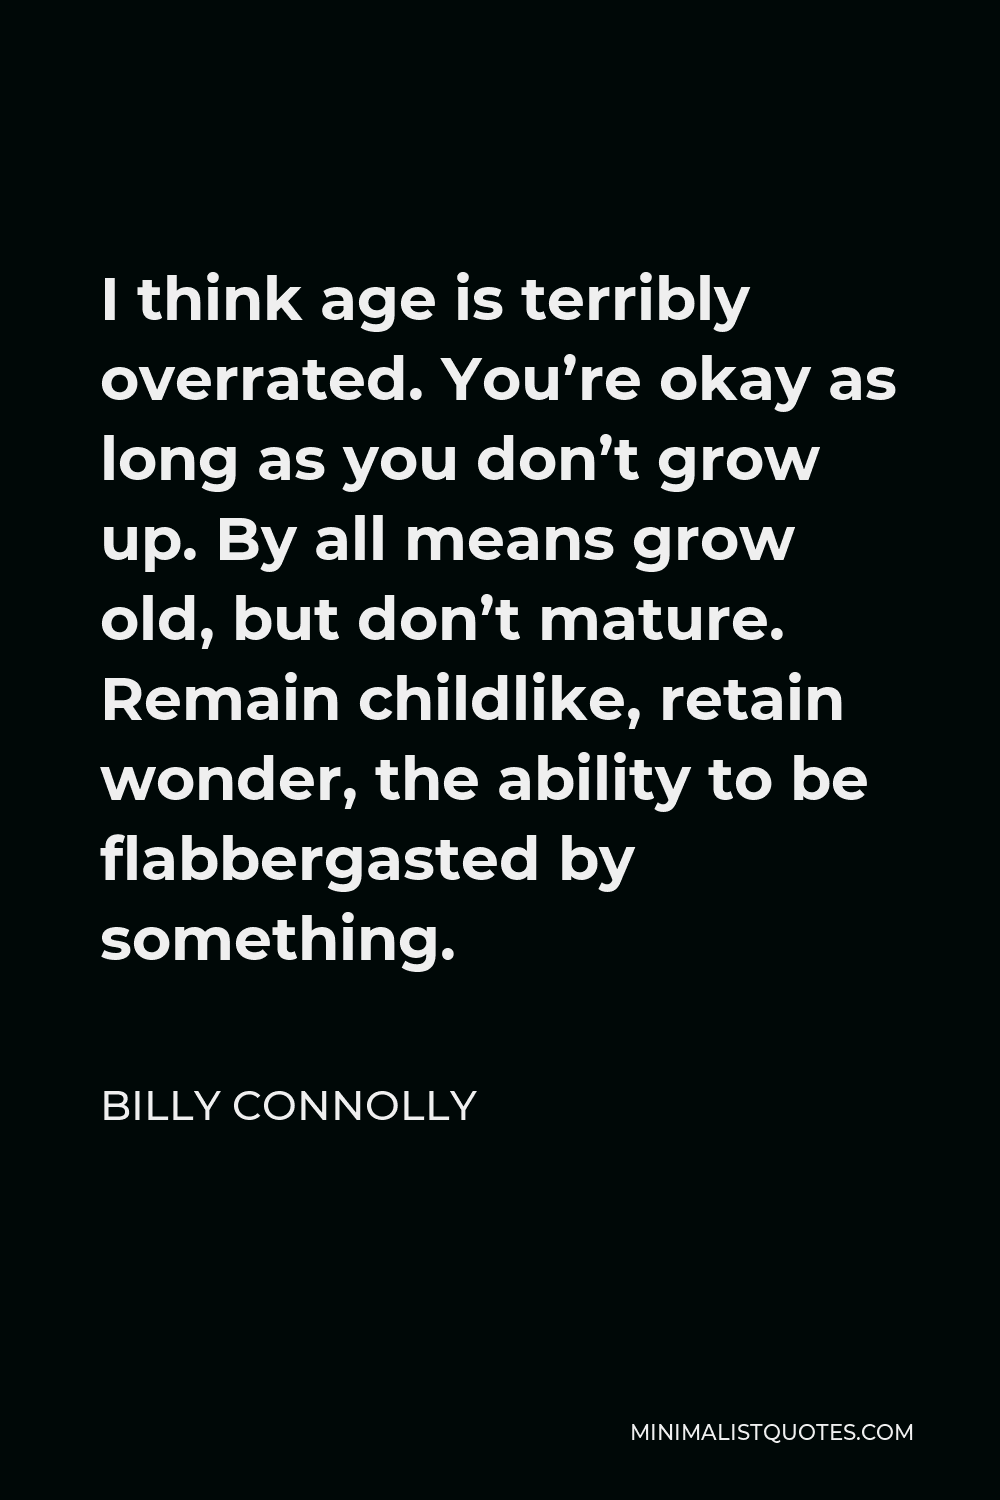 Billy Connolly Quote - I think age is terribly overrated. You’re okay as long as you don’t grow up. By all means grow old, but don’t mature. Remain childlike, retain wonder, the ability to be flabbergasted by something.